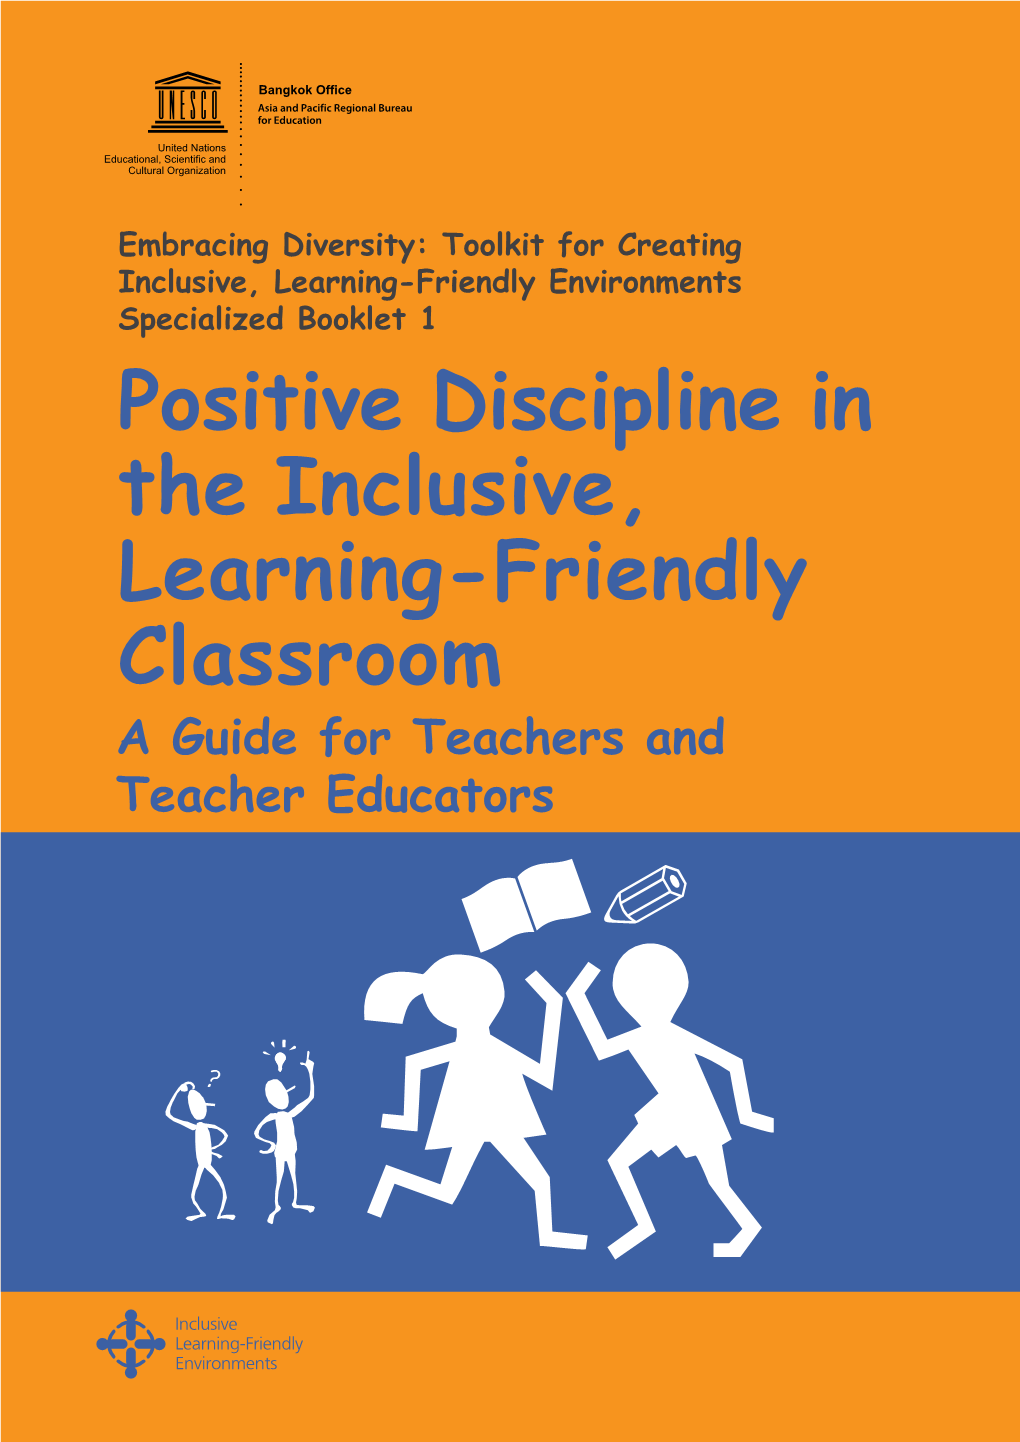 Positive Discipline in the Inclusive, Learning-Friendly Classroom